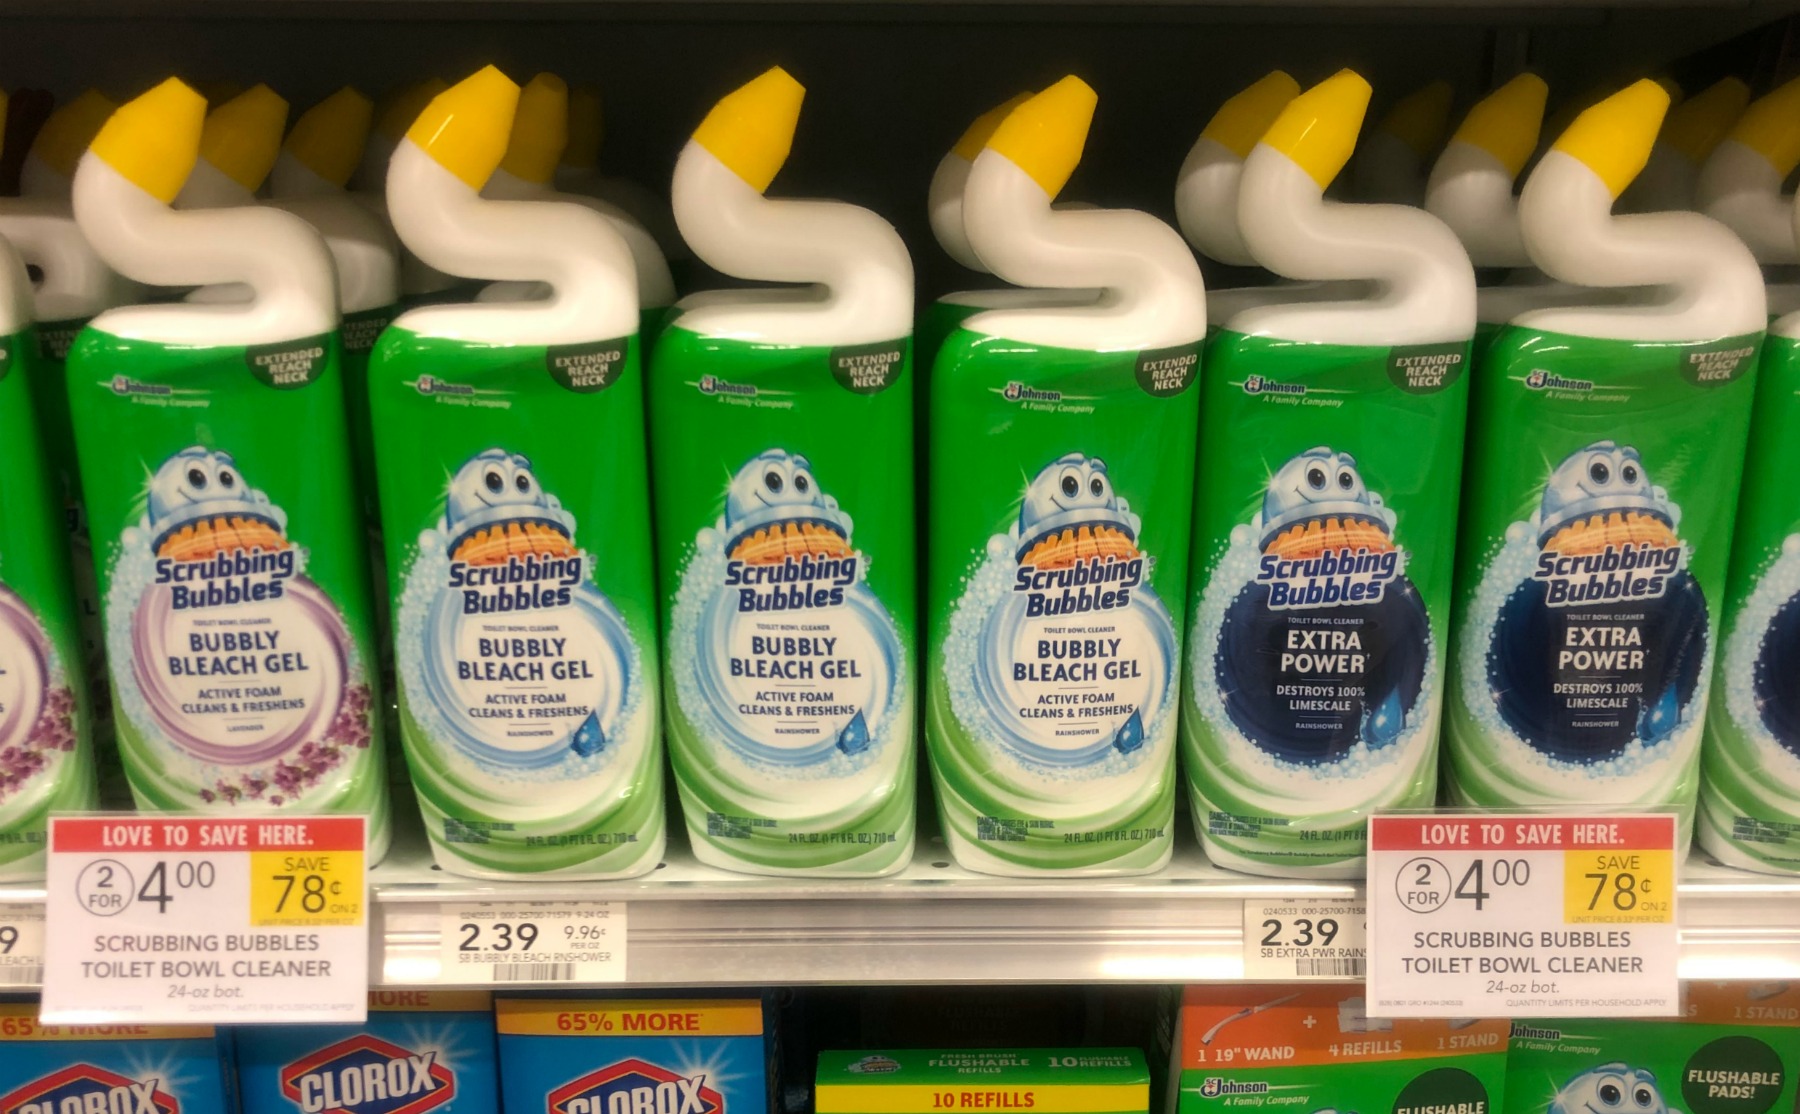 Back-to-School Cleaning Is Quick & Easy with Scrubbing Bubbles® Products - Save Now at Publix on I Heart Publix 1